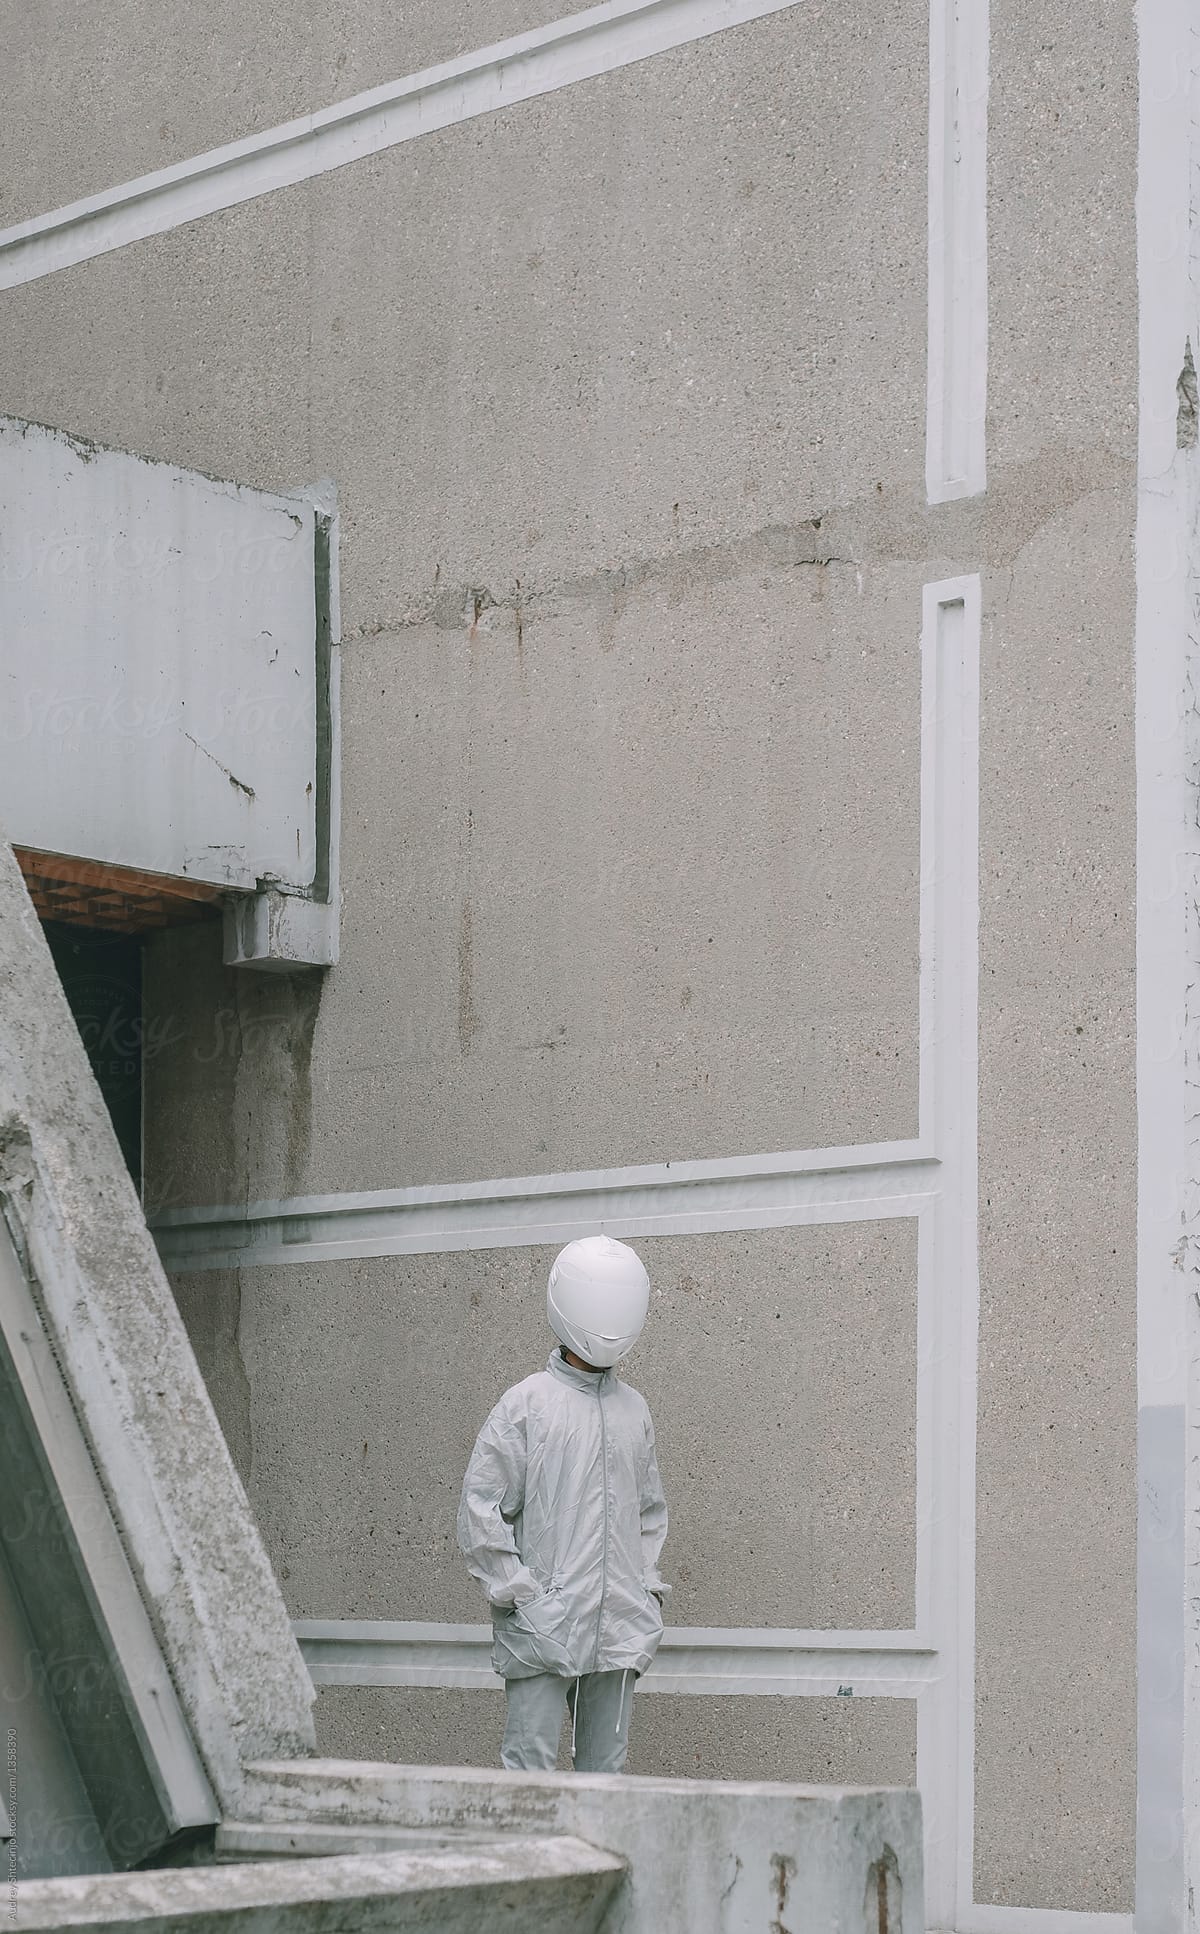 Abstract scene with person with white helmet/mask and silver jacket